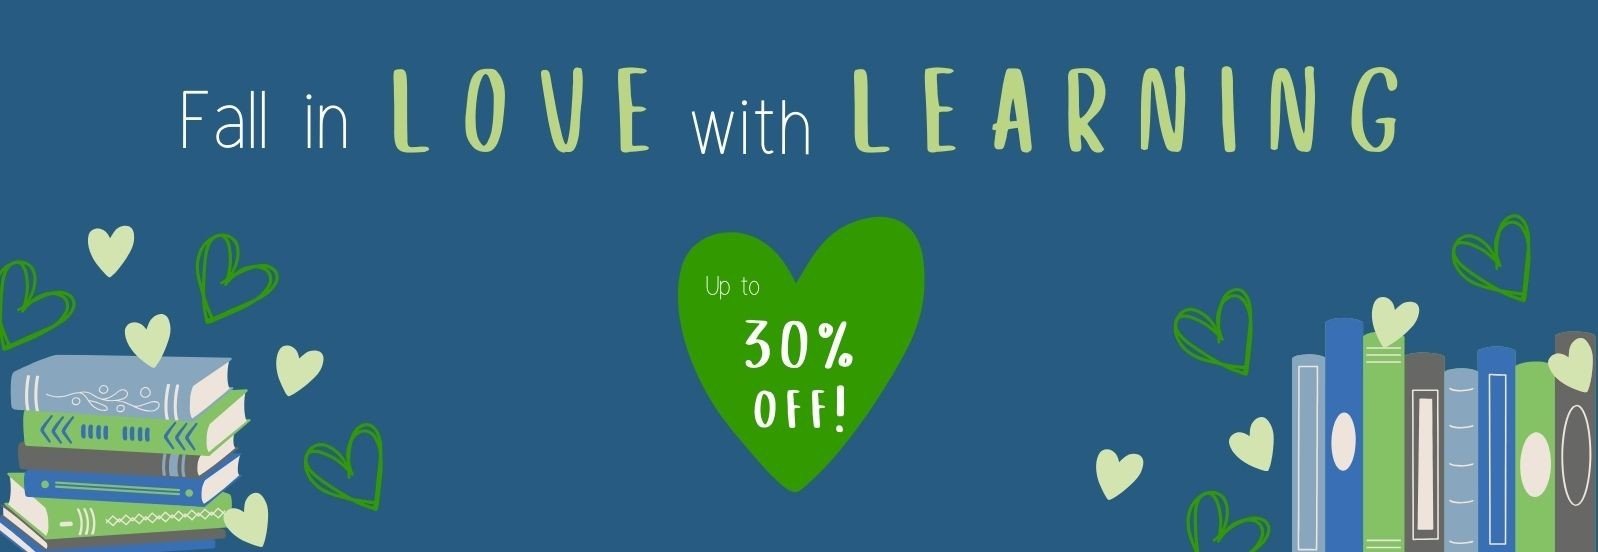 <p>Up to 30% off e-learning!</p>